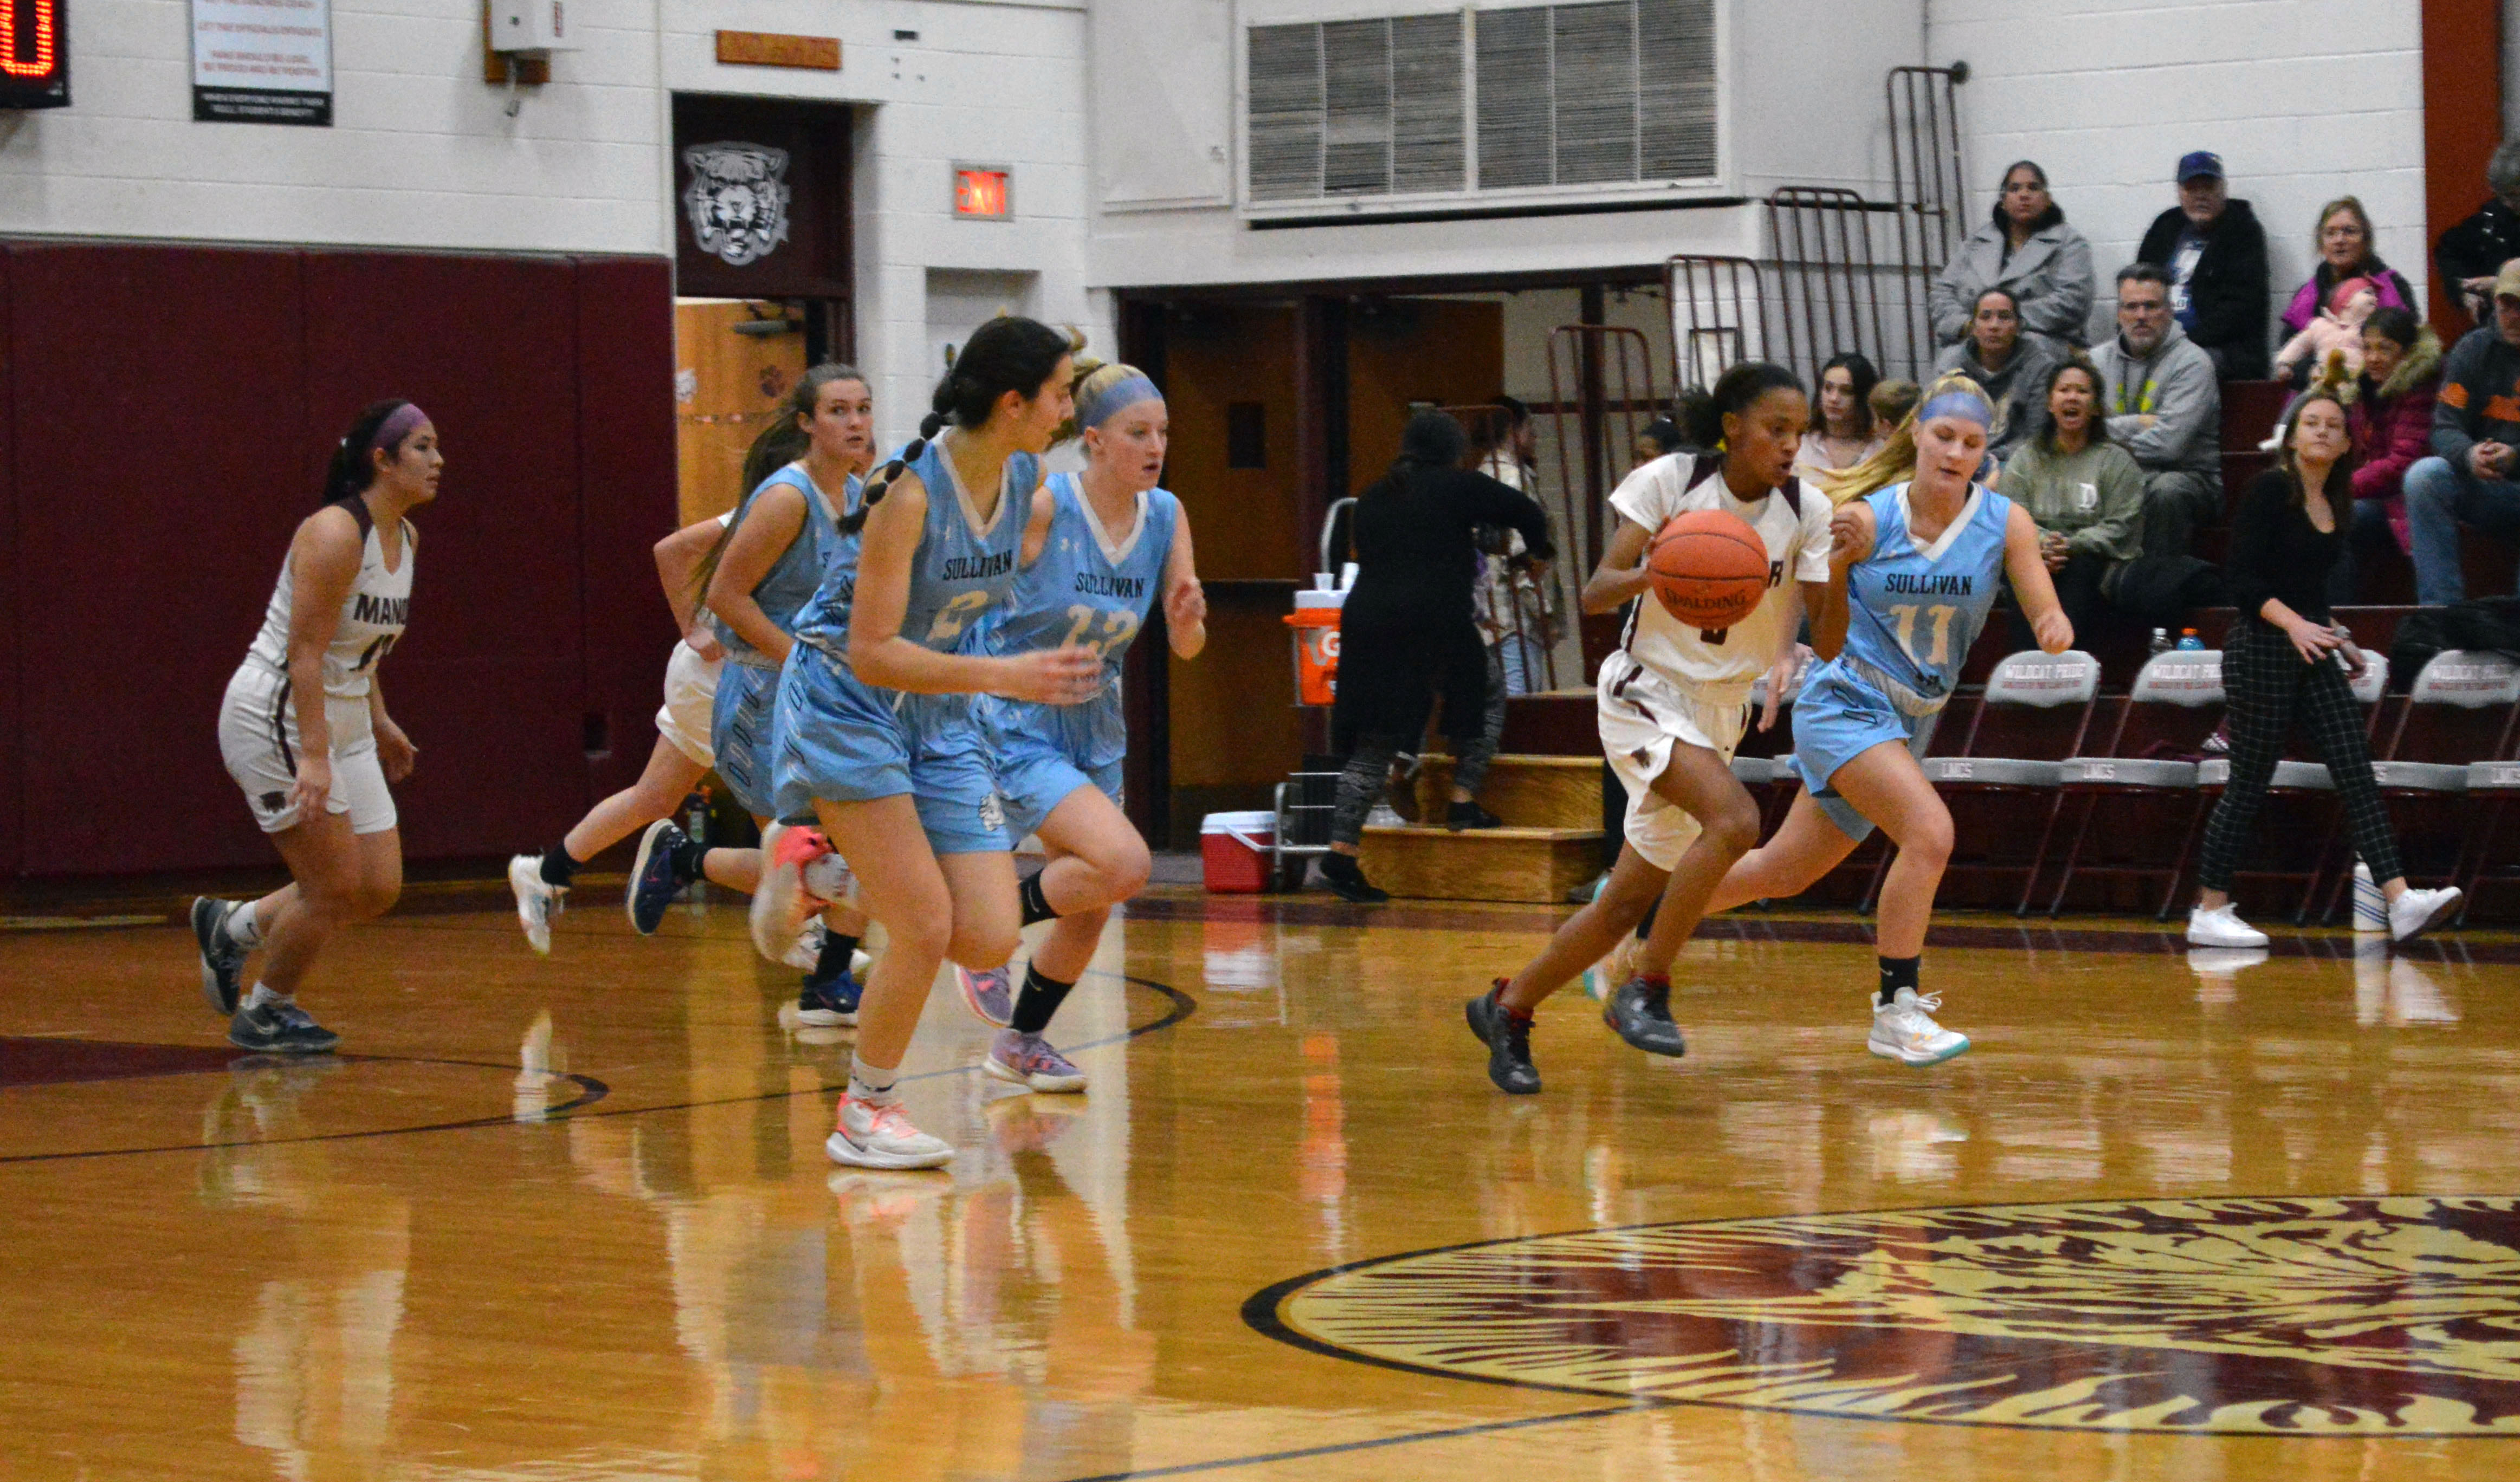 A Manor player dribbles down the court  as SW players pursue during a girls basketball game